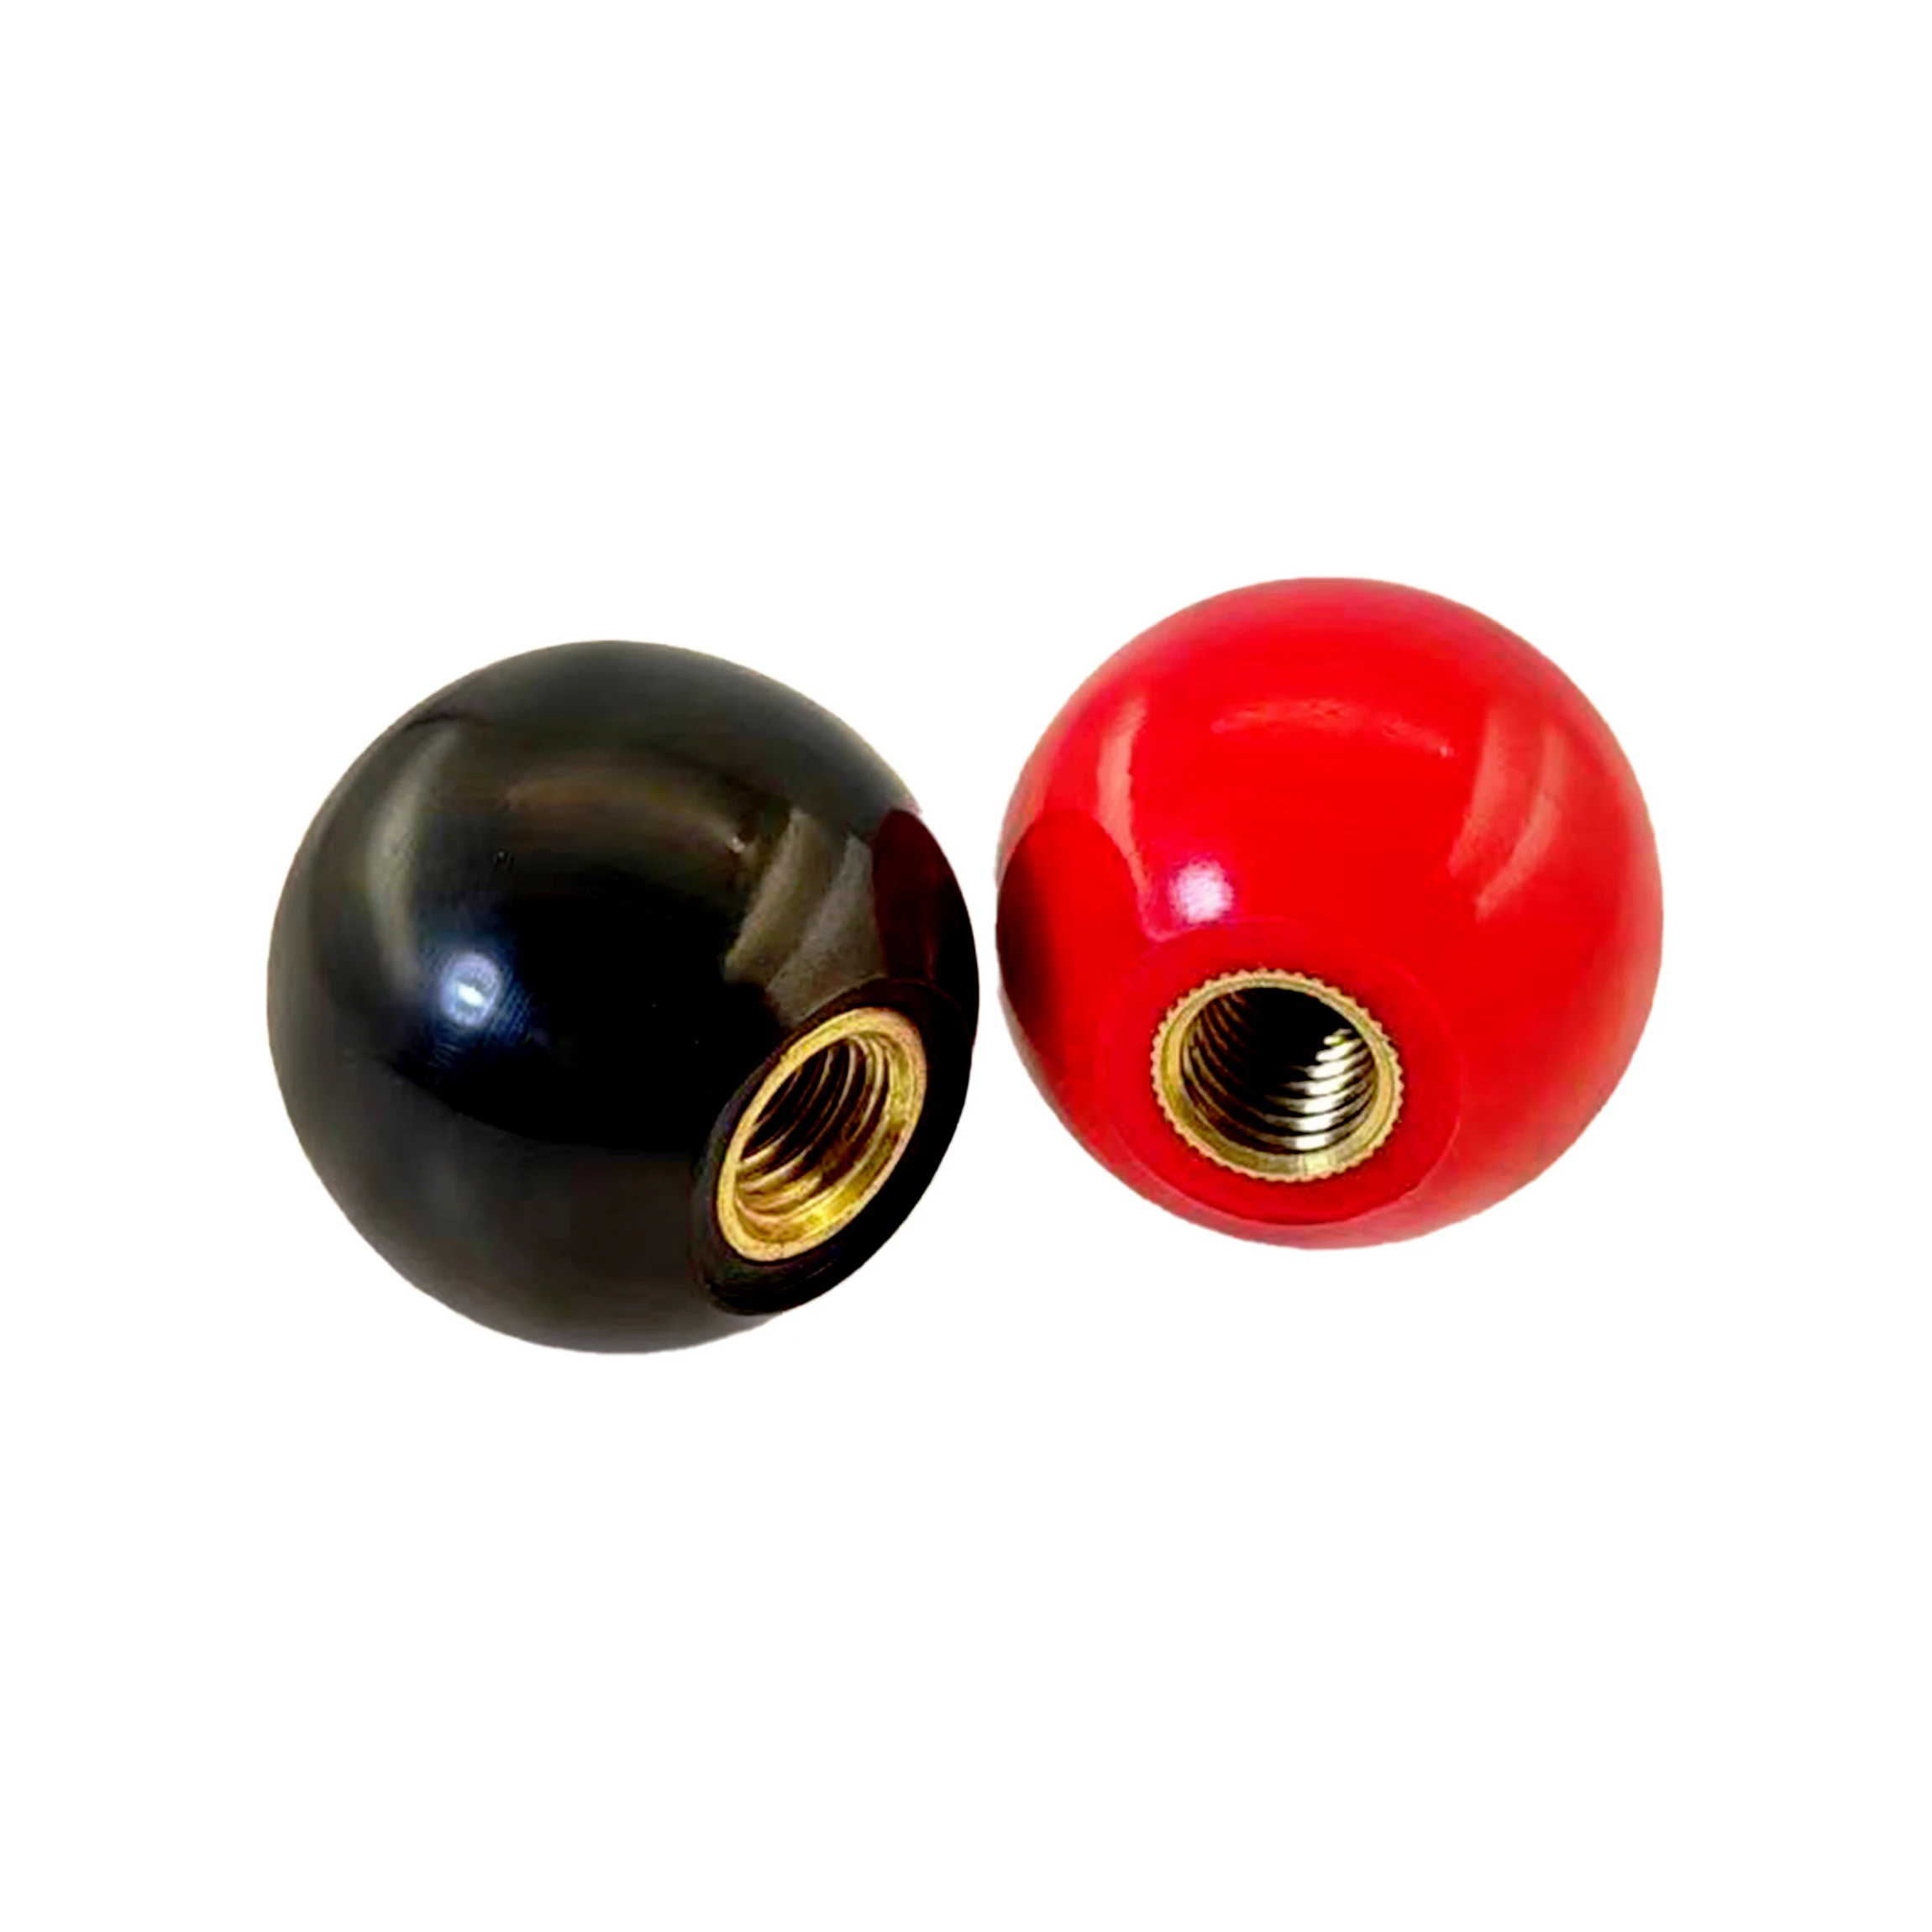 Bakelite Ball Handles black red customized color handle machine clamping female brass threaded handle knobs lathe accessories